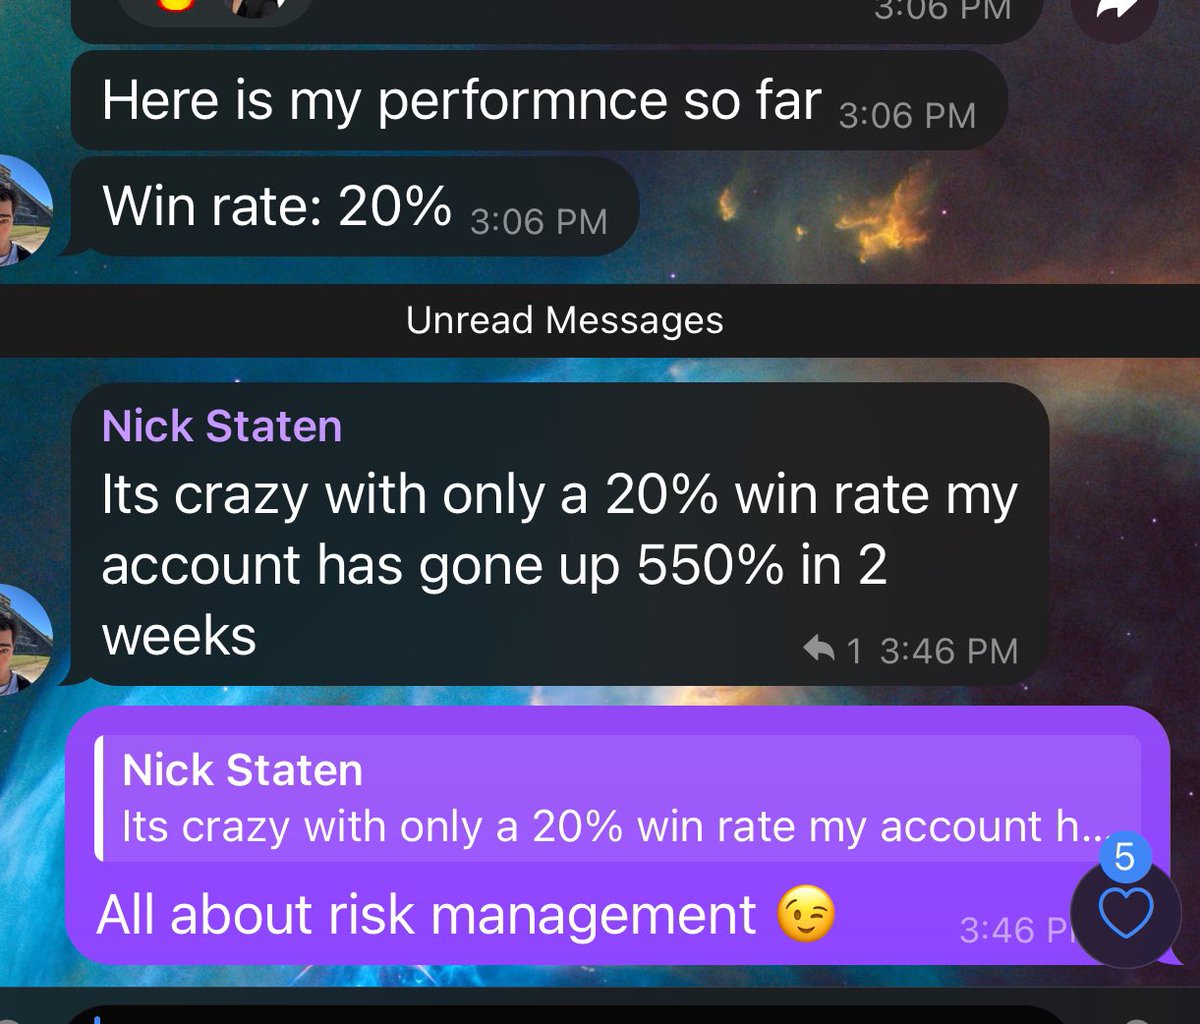 Shoutout to Nick. He’s really been working hard. I know he wants his numbers to be better winning % wise but even with a 20% win rate he’s grown his account a lot! Looking forward to seeing his results 30 days from now. He’s a VIP student